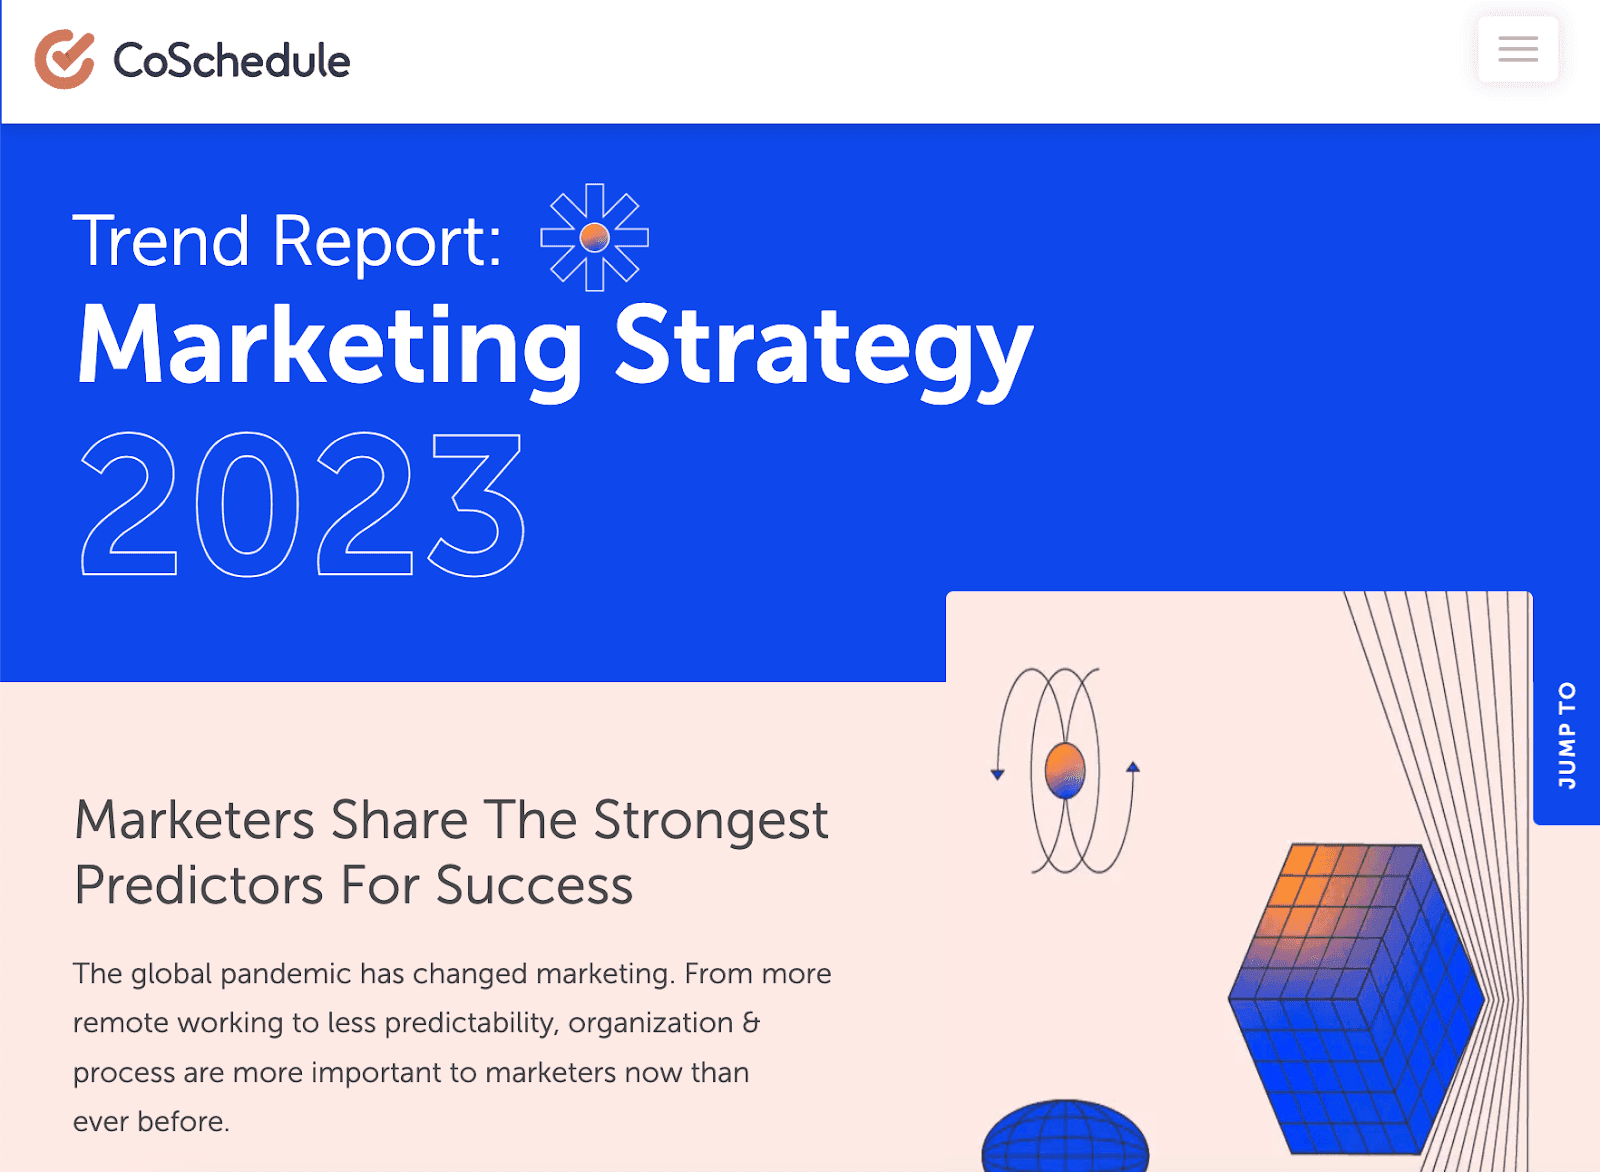 Research from CoSchedule on trending marketing strategies